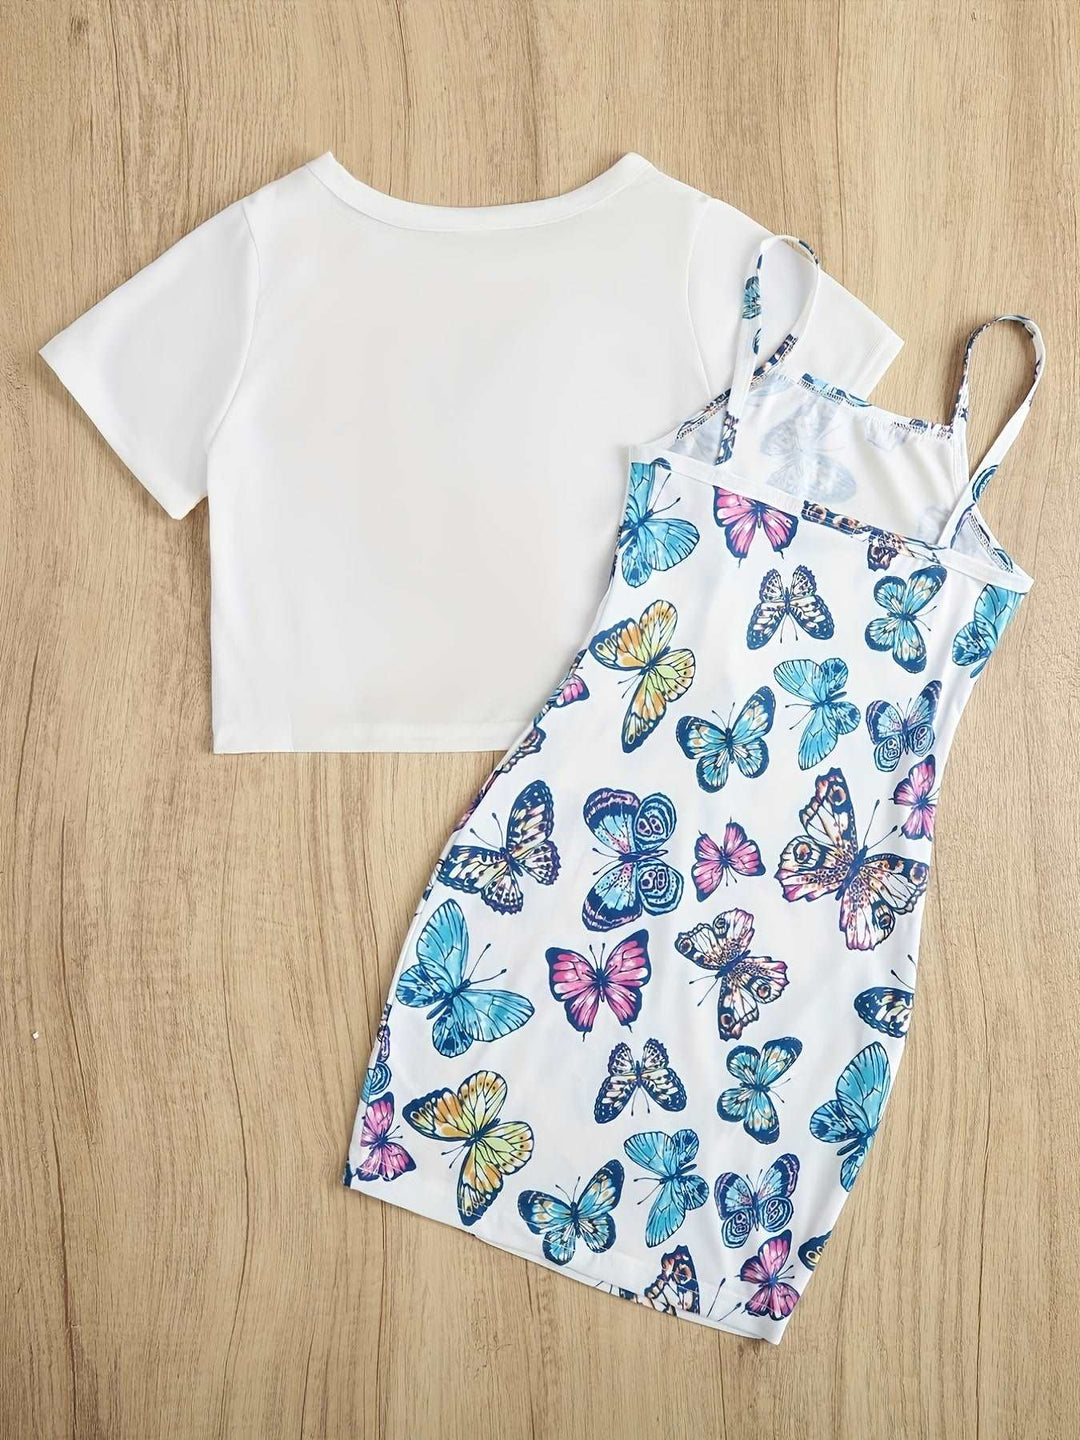 Adorable Girls Butterfly Graphic Tee and Cami Dress Sets - Gen U Us Products